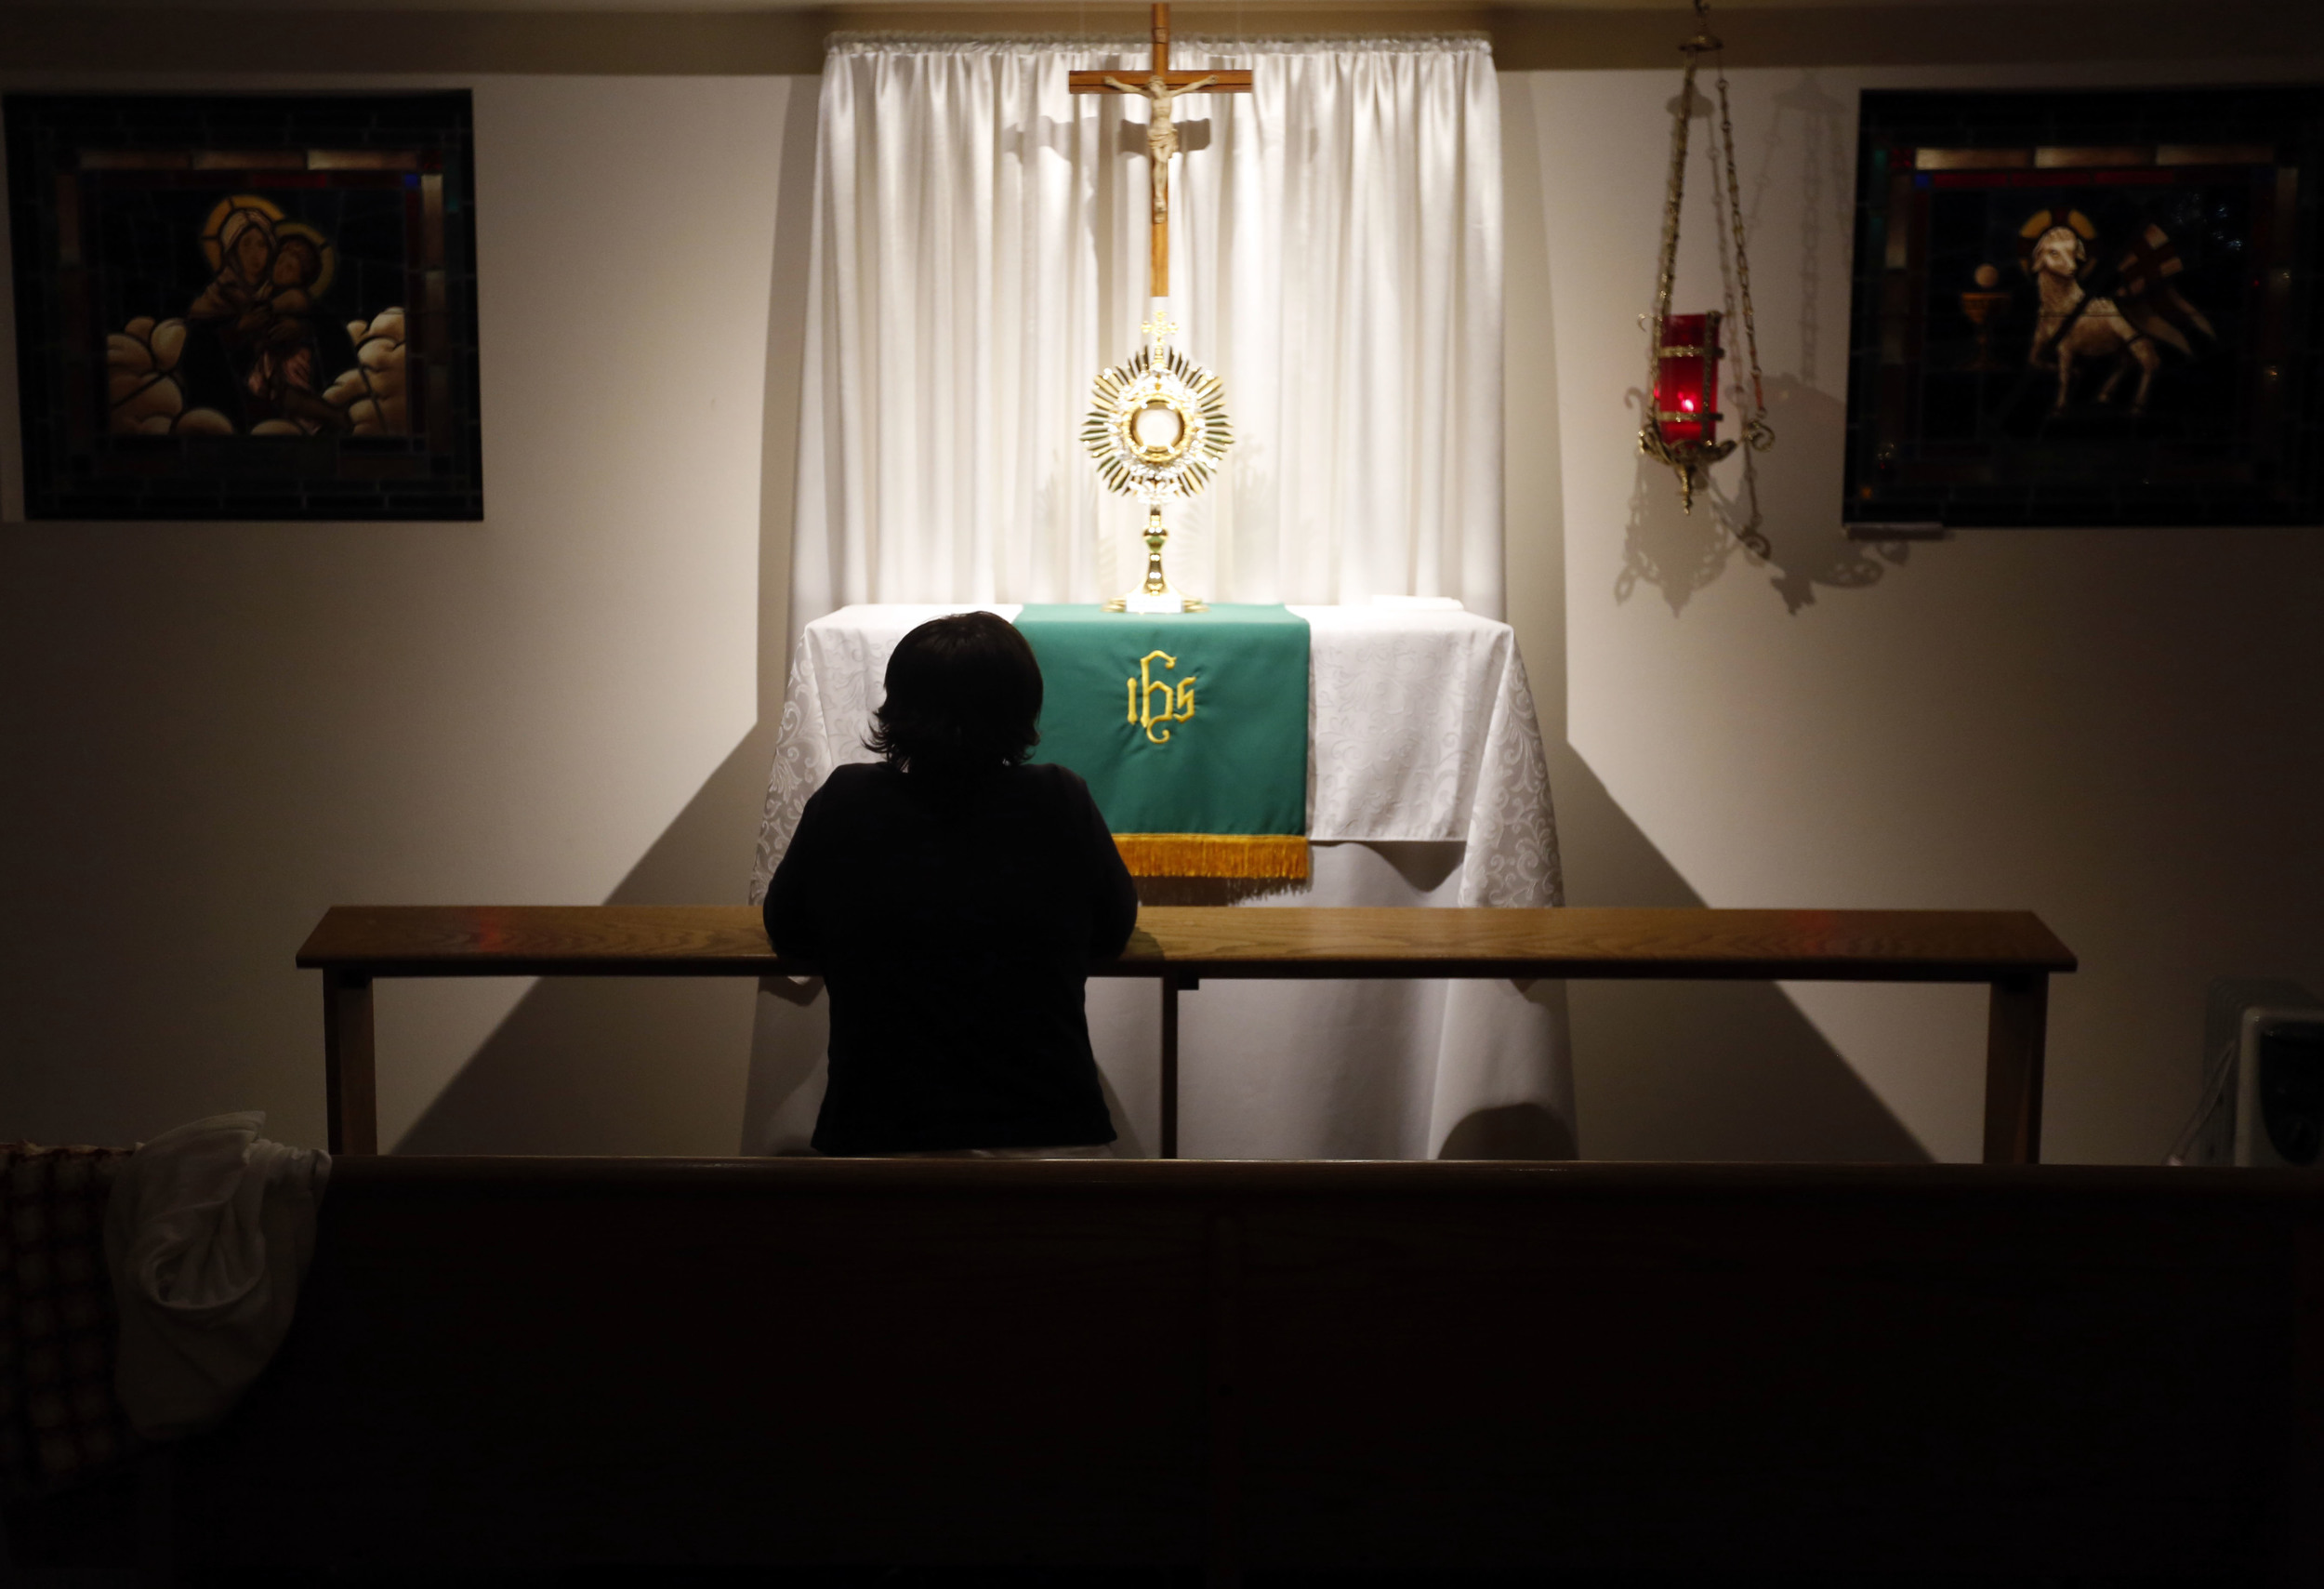   Carol LeCompte, 66, of Kennewick, sits quietly as she prays at the perpetual adoration chapel at St. Joseph Catholic Church in Kennewick during the 2 a.m. hour. LeCompte, who is the coordinator of the program, spends a few early morning hours a wee